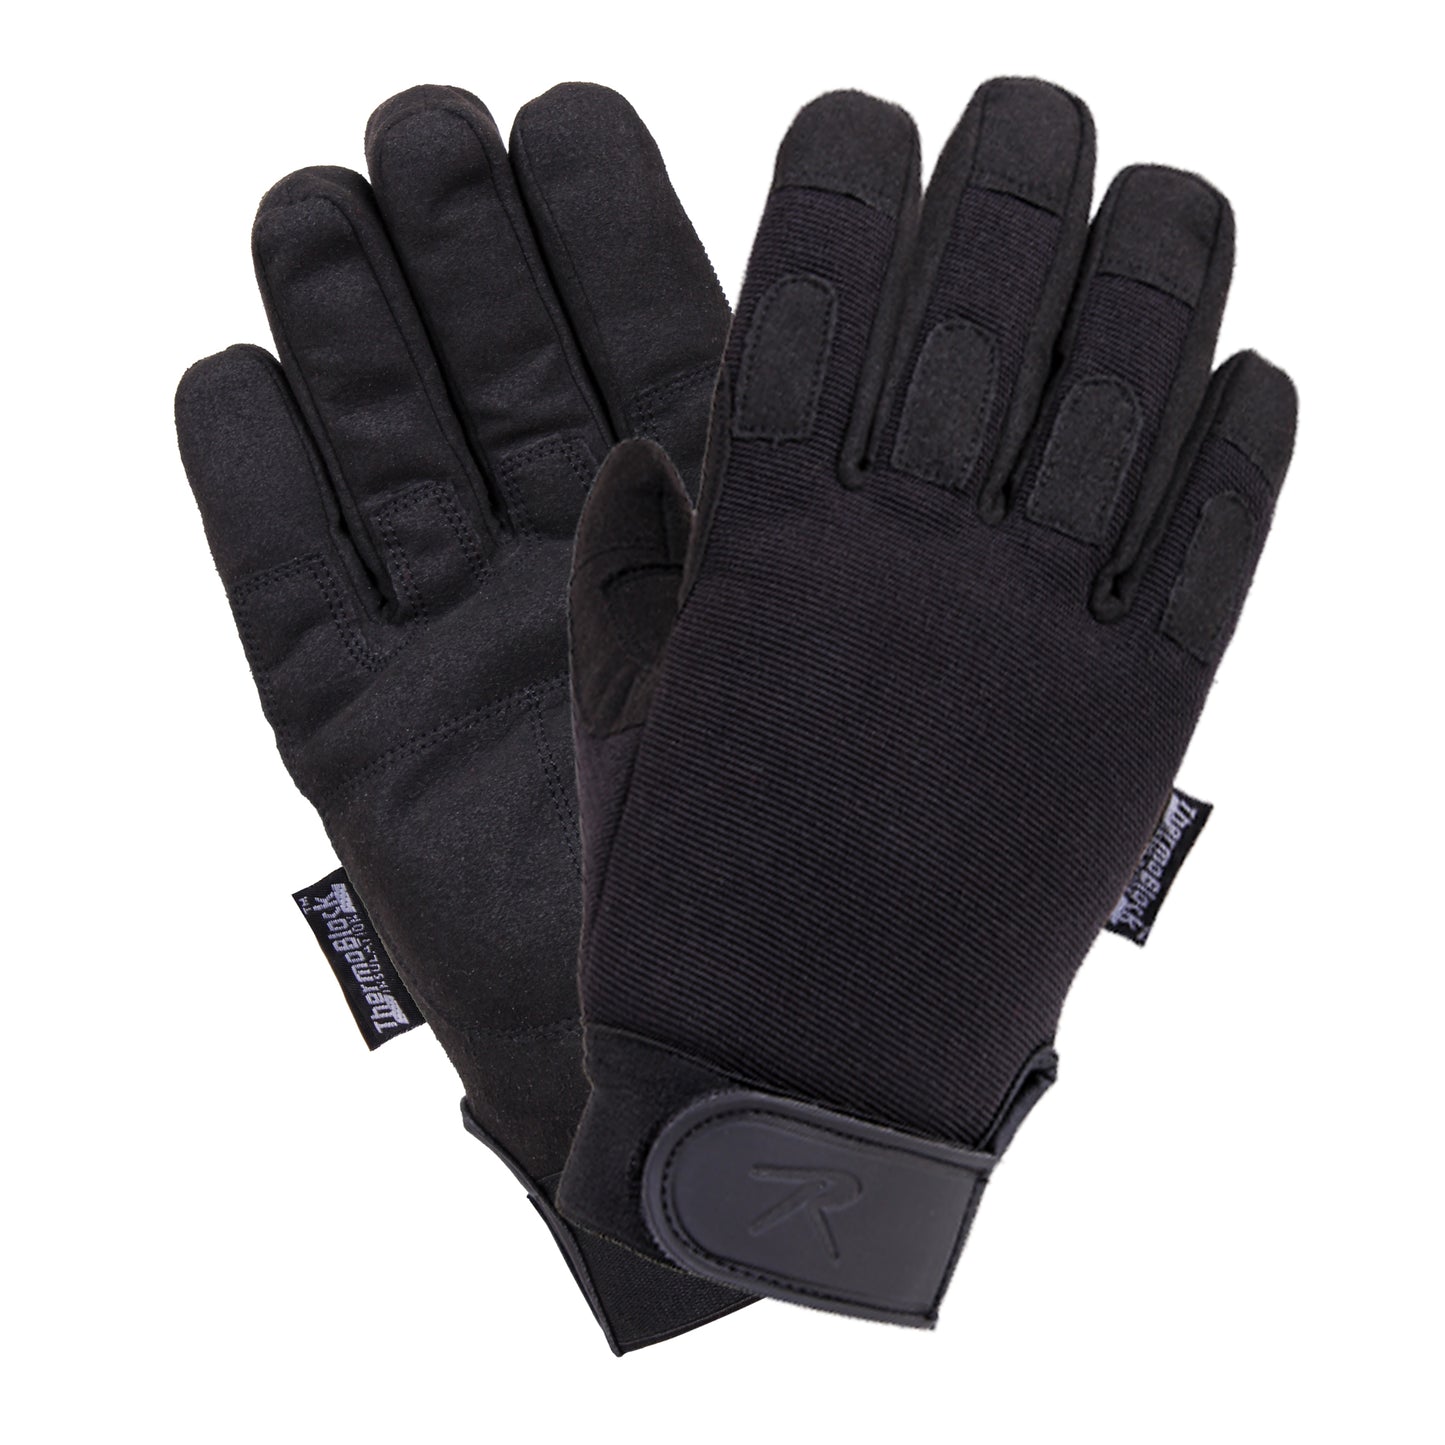 Wild West Cold Weather All Purpose Duty Gloves